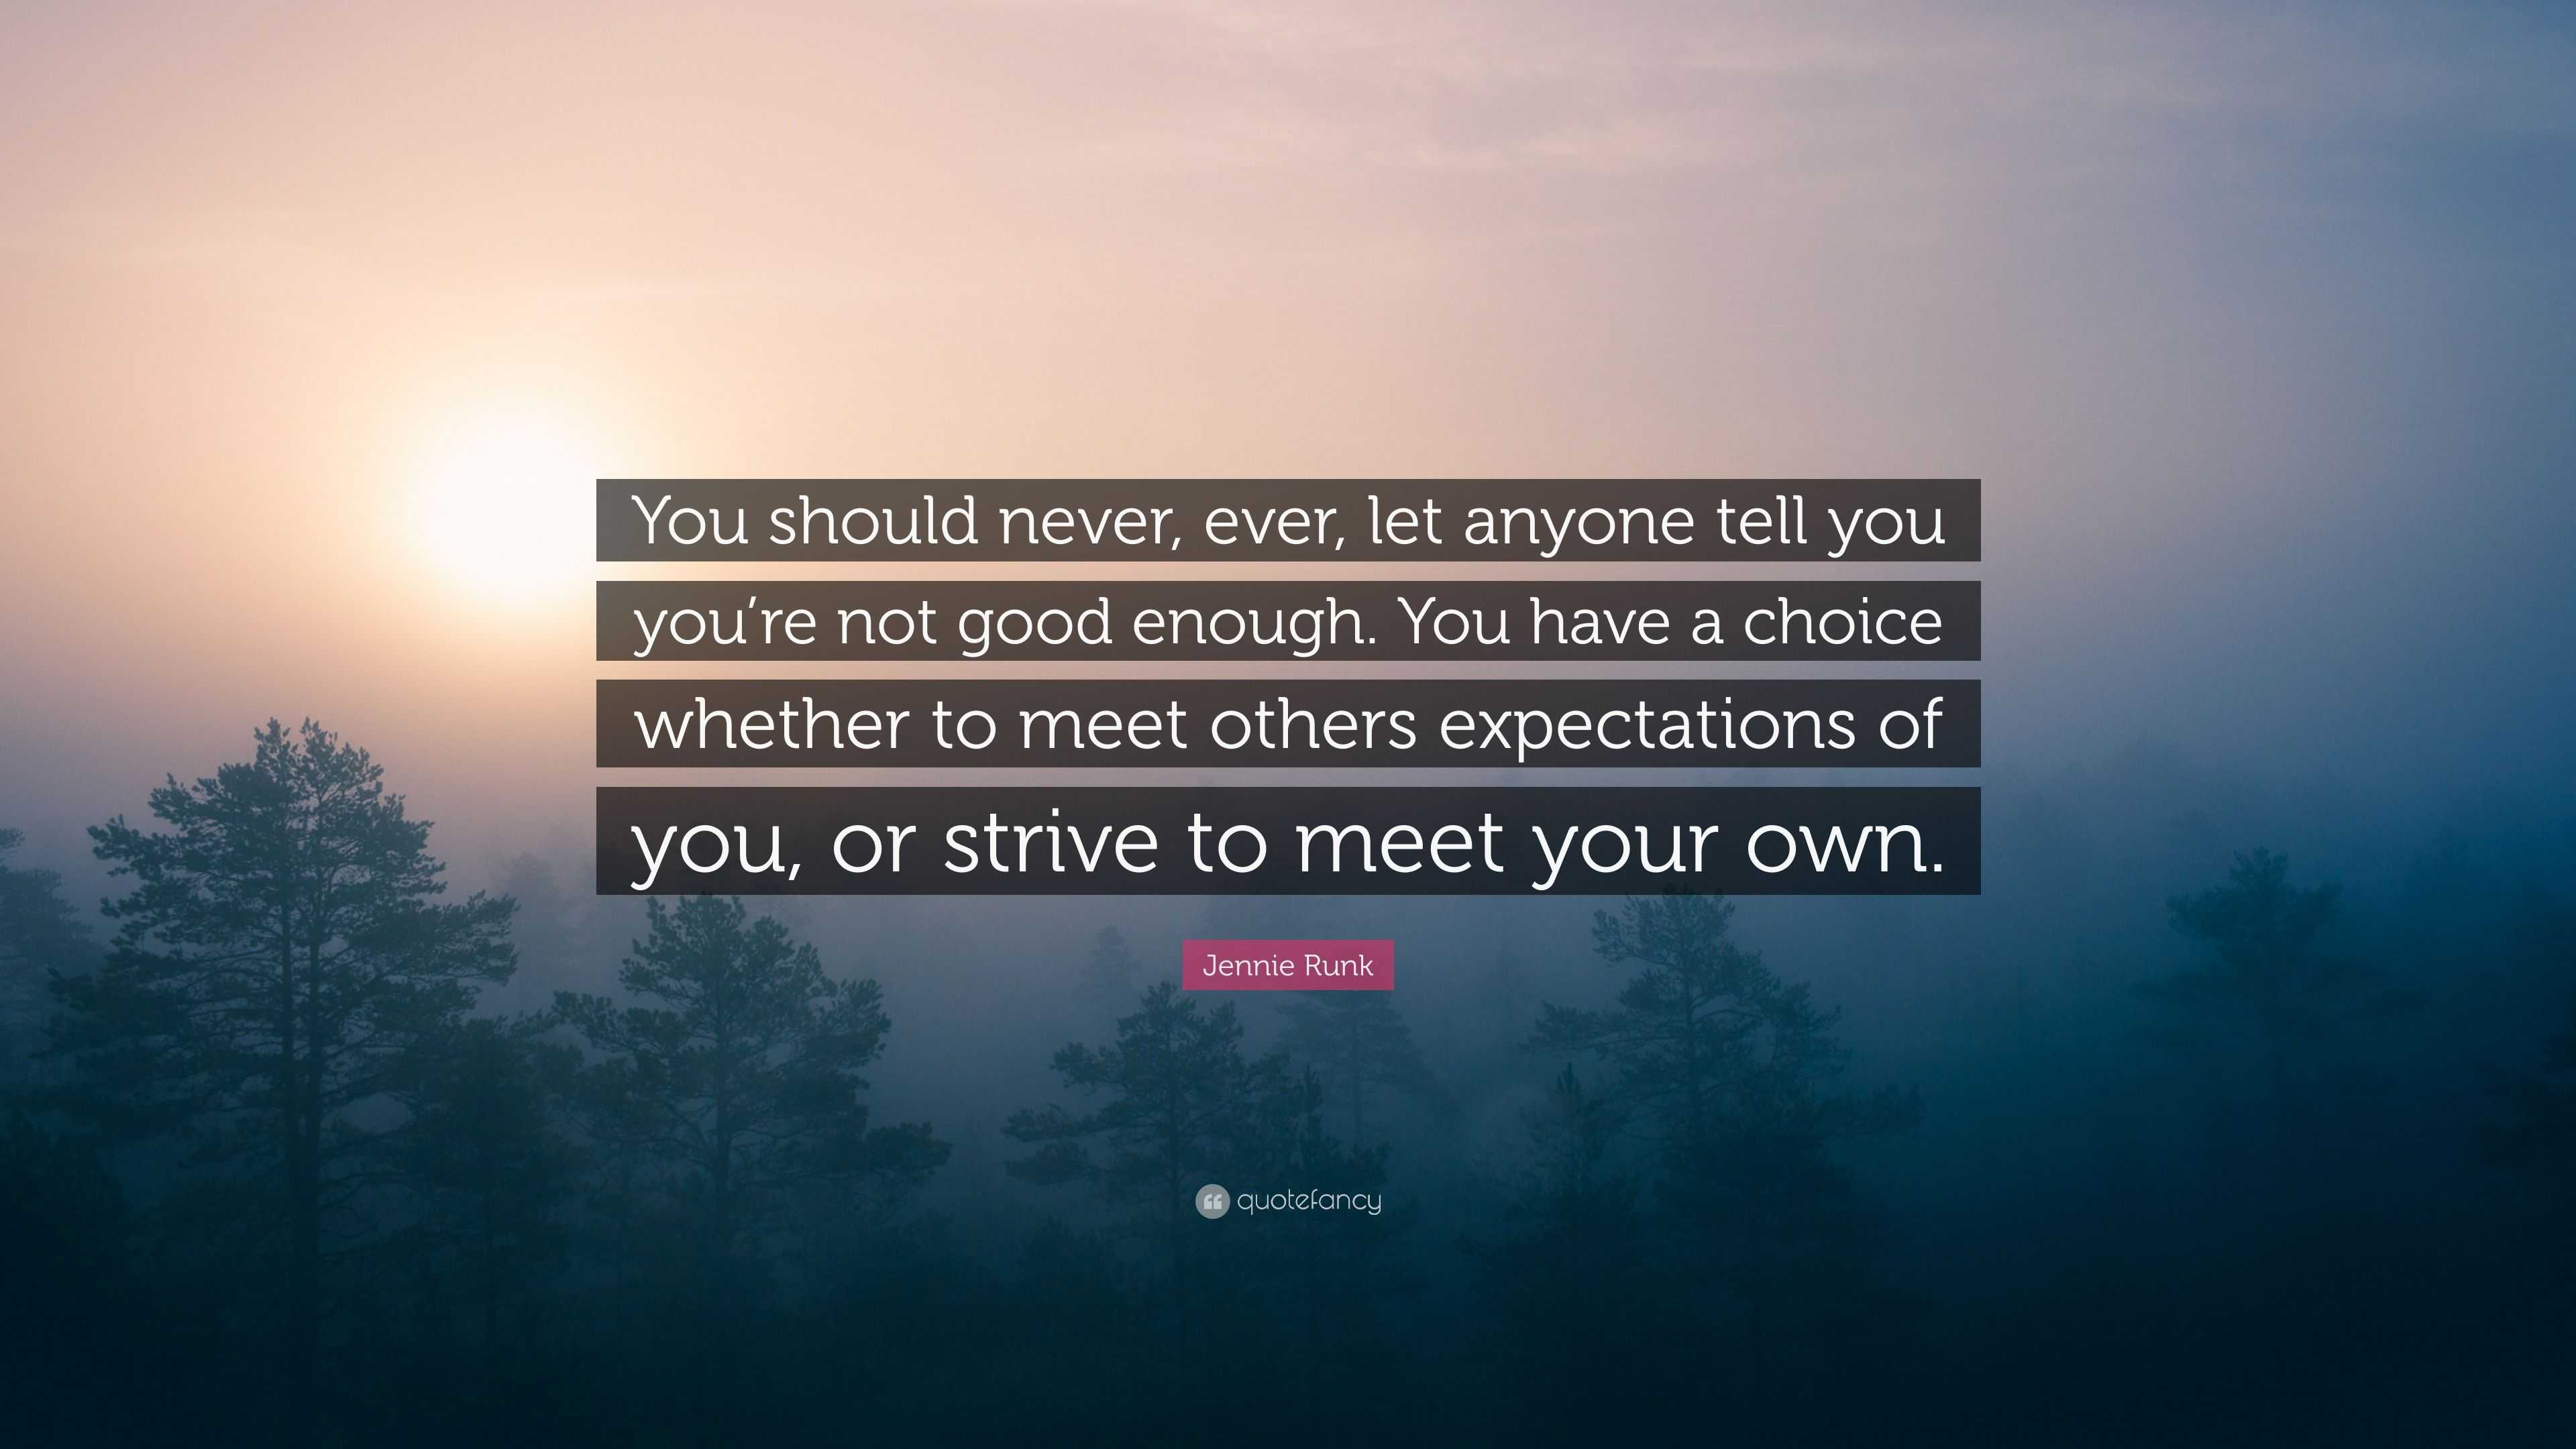 Jennie Runk Quote You Should Never Ever Let Anyone Tell You You Re Not Good Enough You Have A Choice Whether To Meet Others Expectation